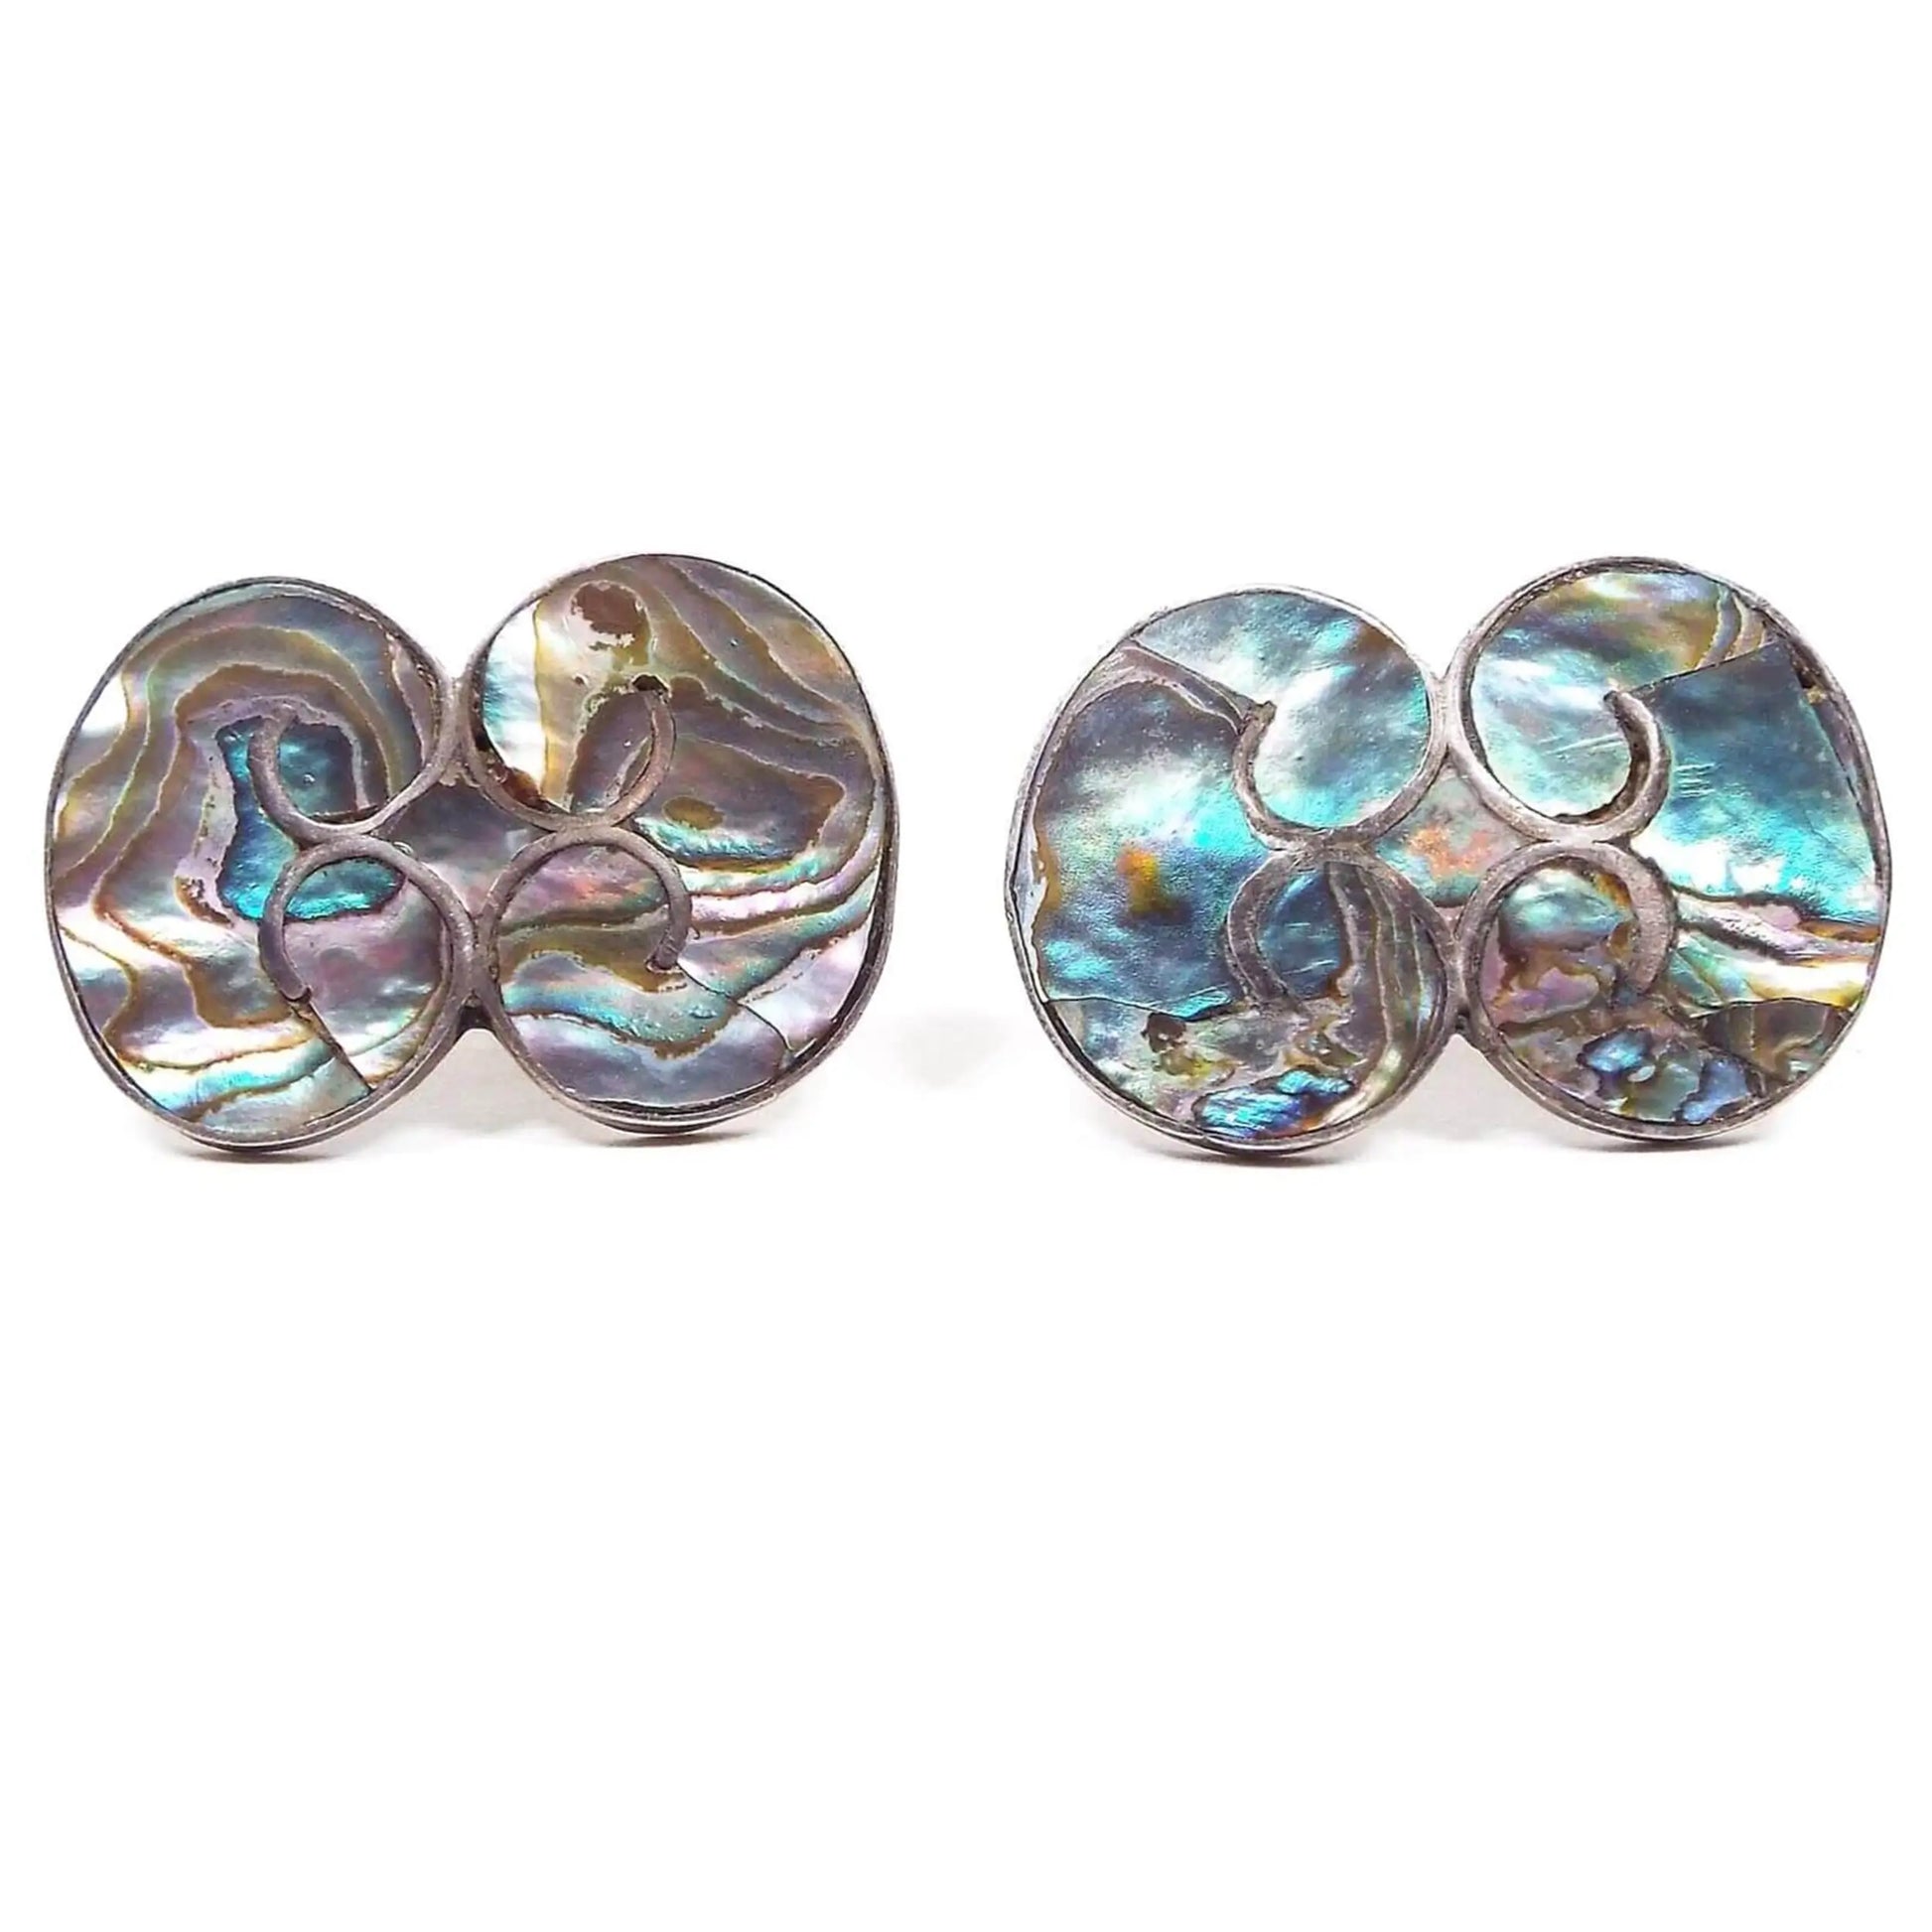 Front view of the Taxco 940 retro vintage screw back earrings. The metal is dark silver in color. Each earring has a shape that looks like two kidney beans facing each other. The inside area has inlaid abalone shell with multi color flashes of color. 